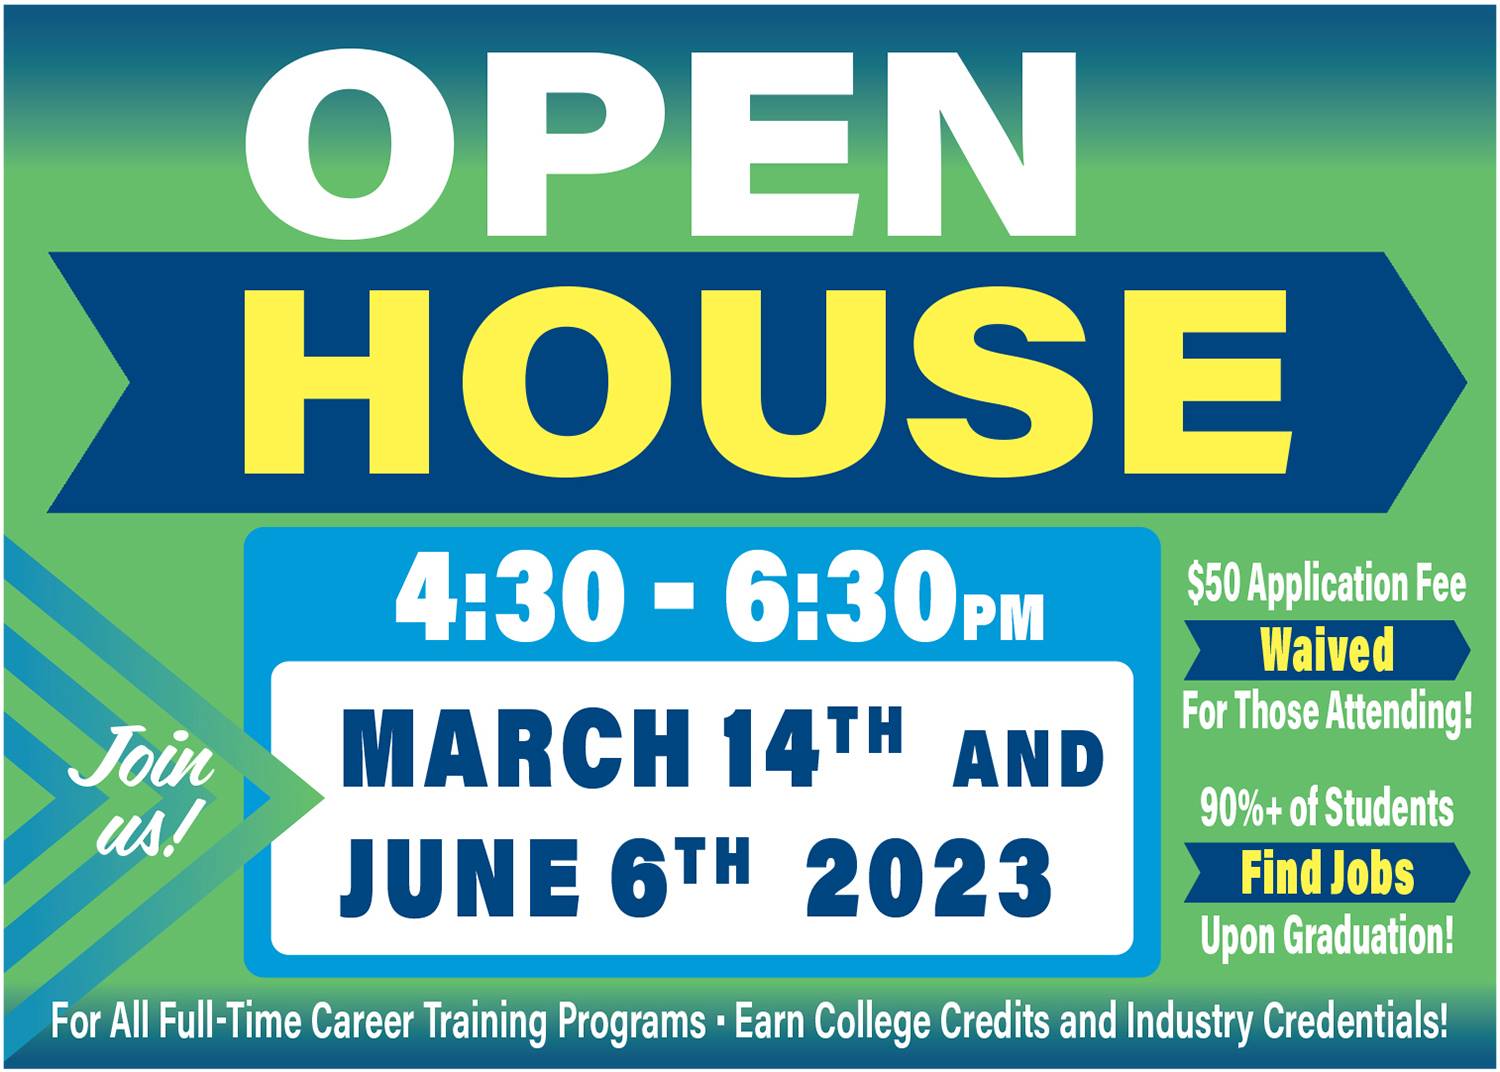 2023 Open House Dates